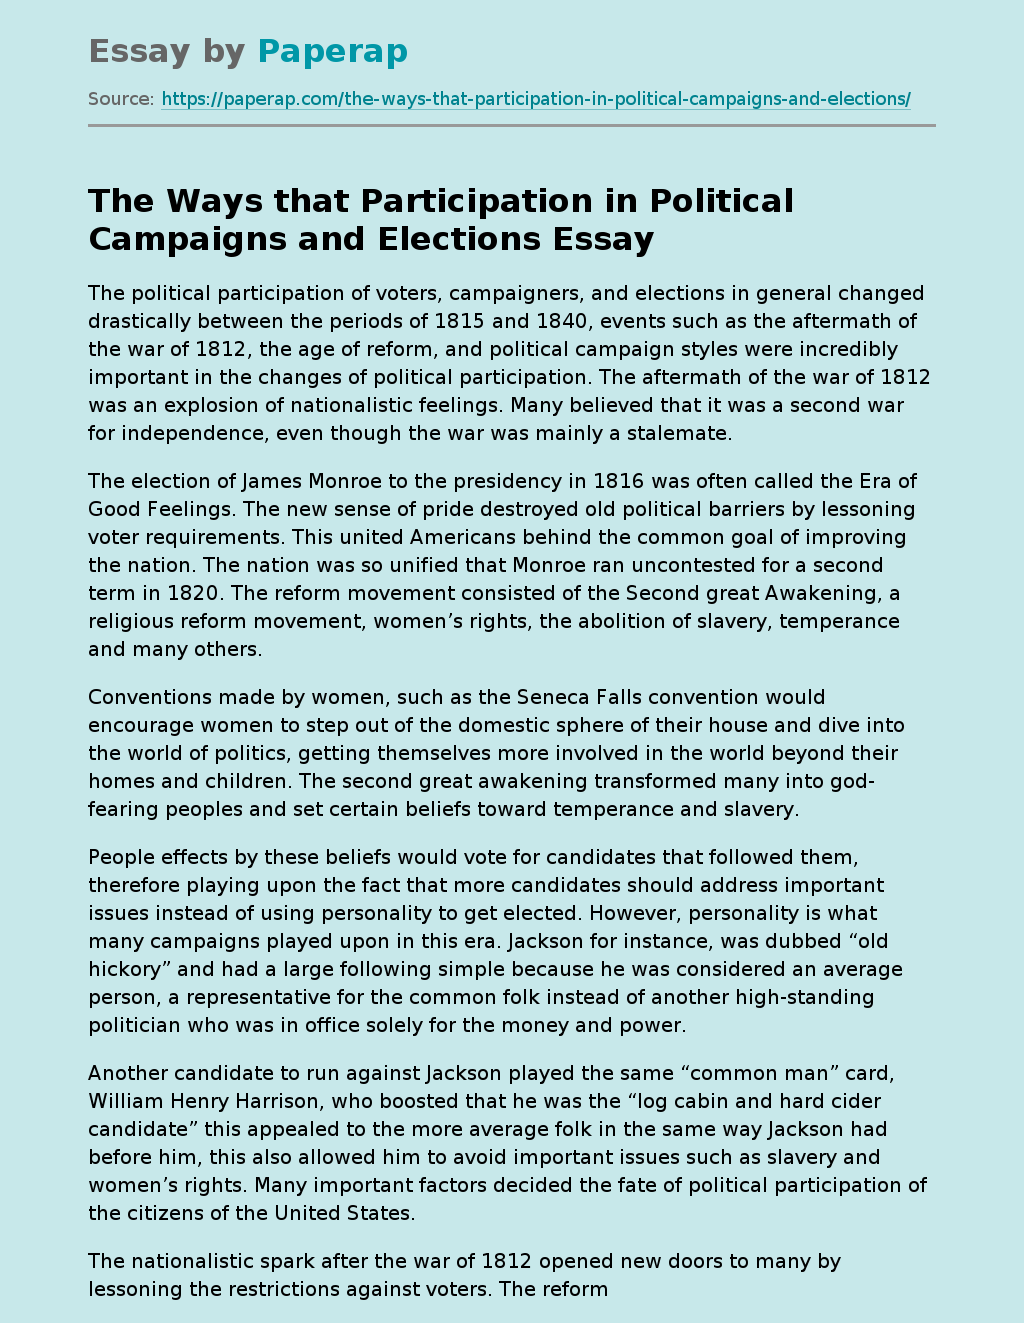 The Ways that Participation in Political Campaigns and Elections